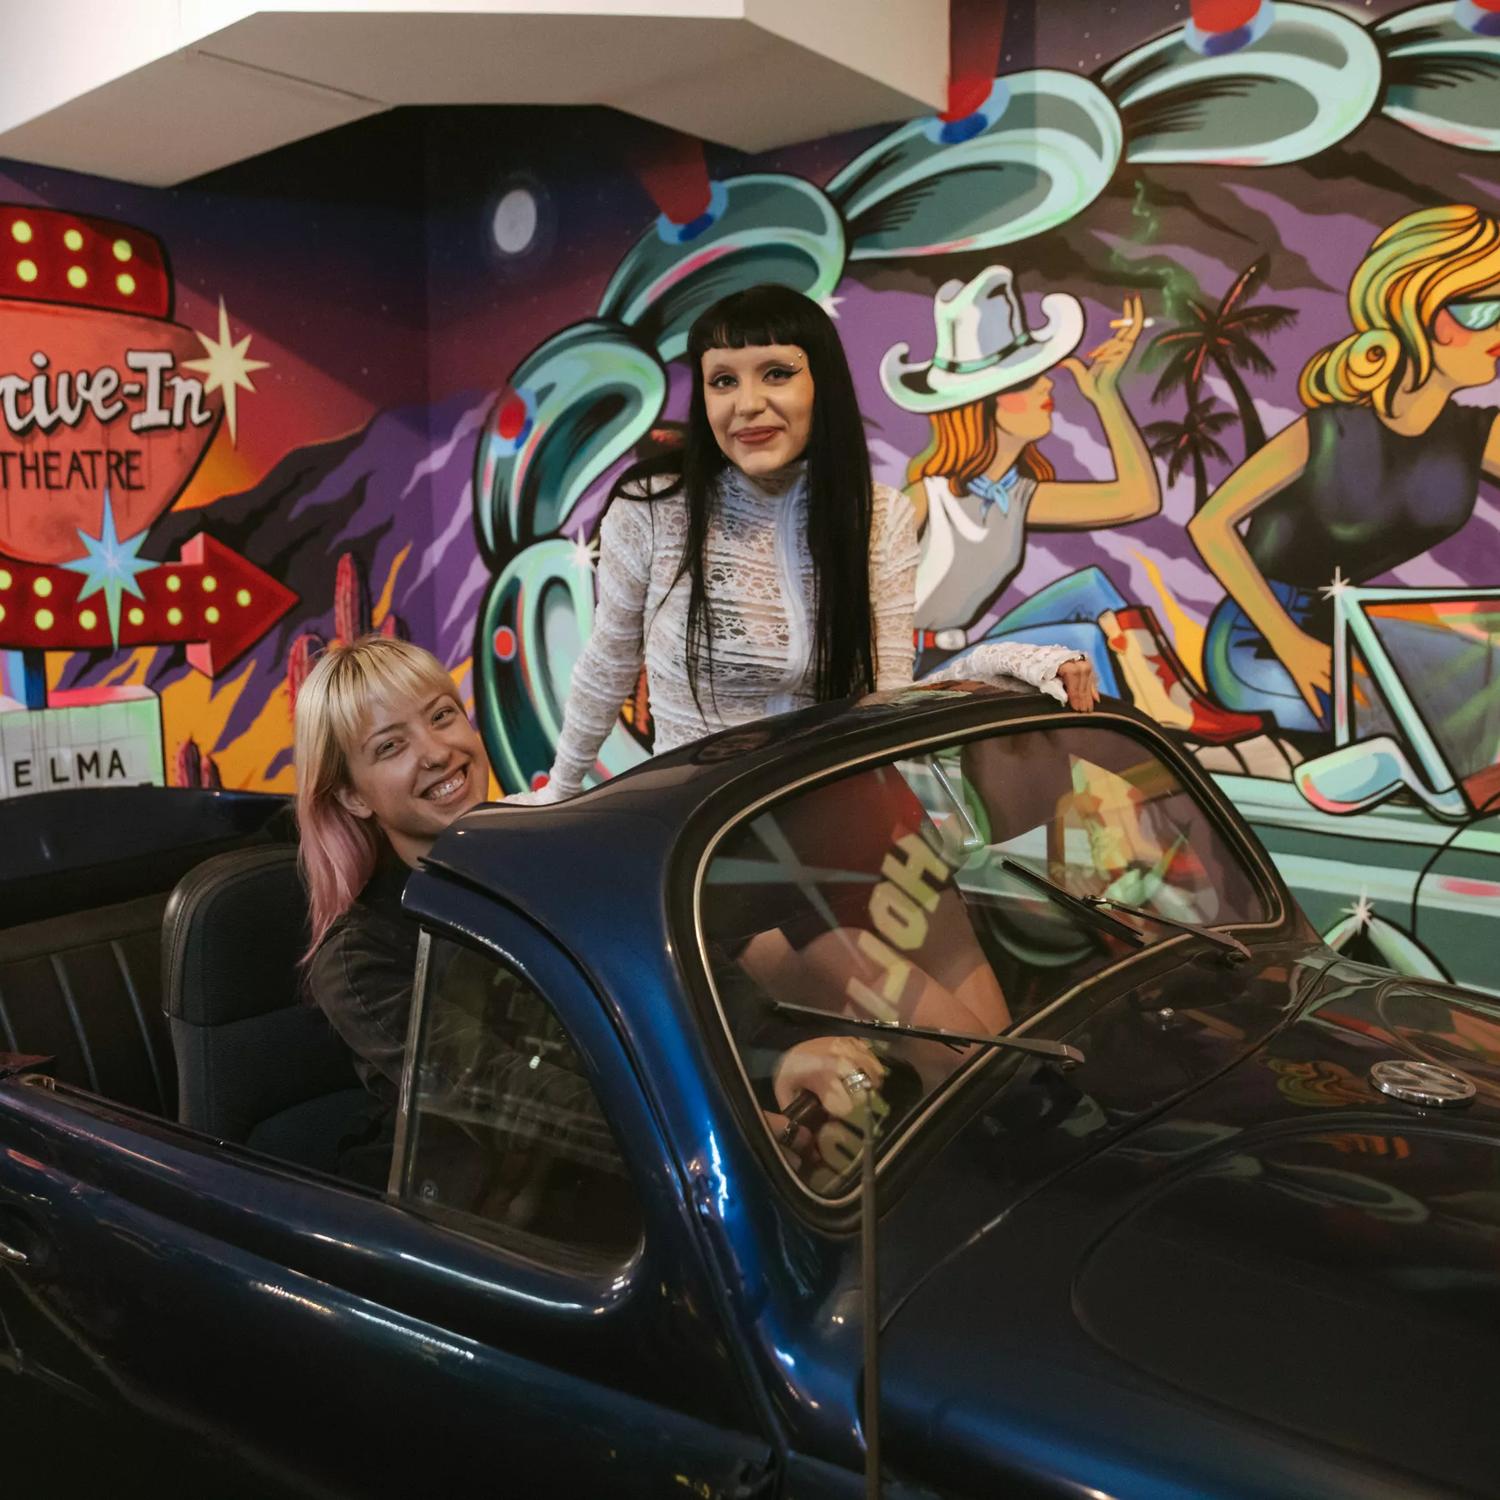 Inside Bizarre Bazaar, a thrift store in Te Aro, Wellington. Two people are sitting in an old convertible car with a colourful Americana mural on the wall behind them. 